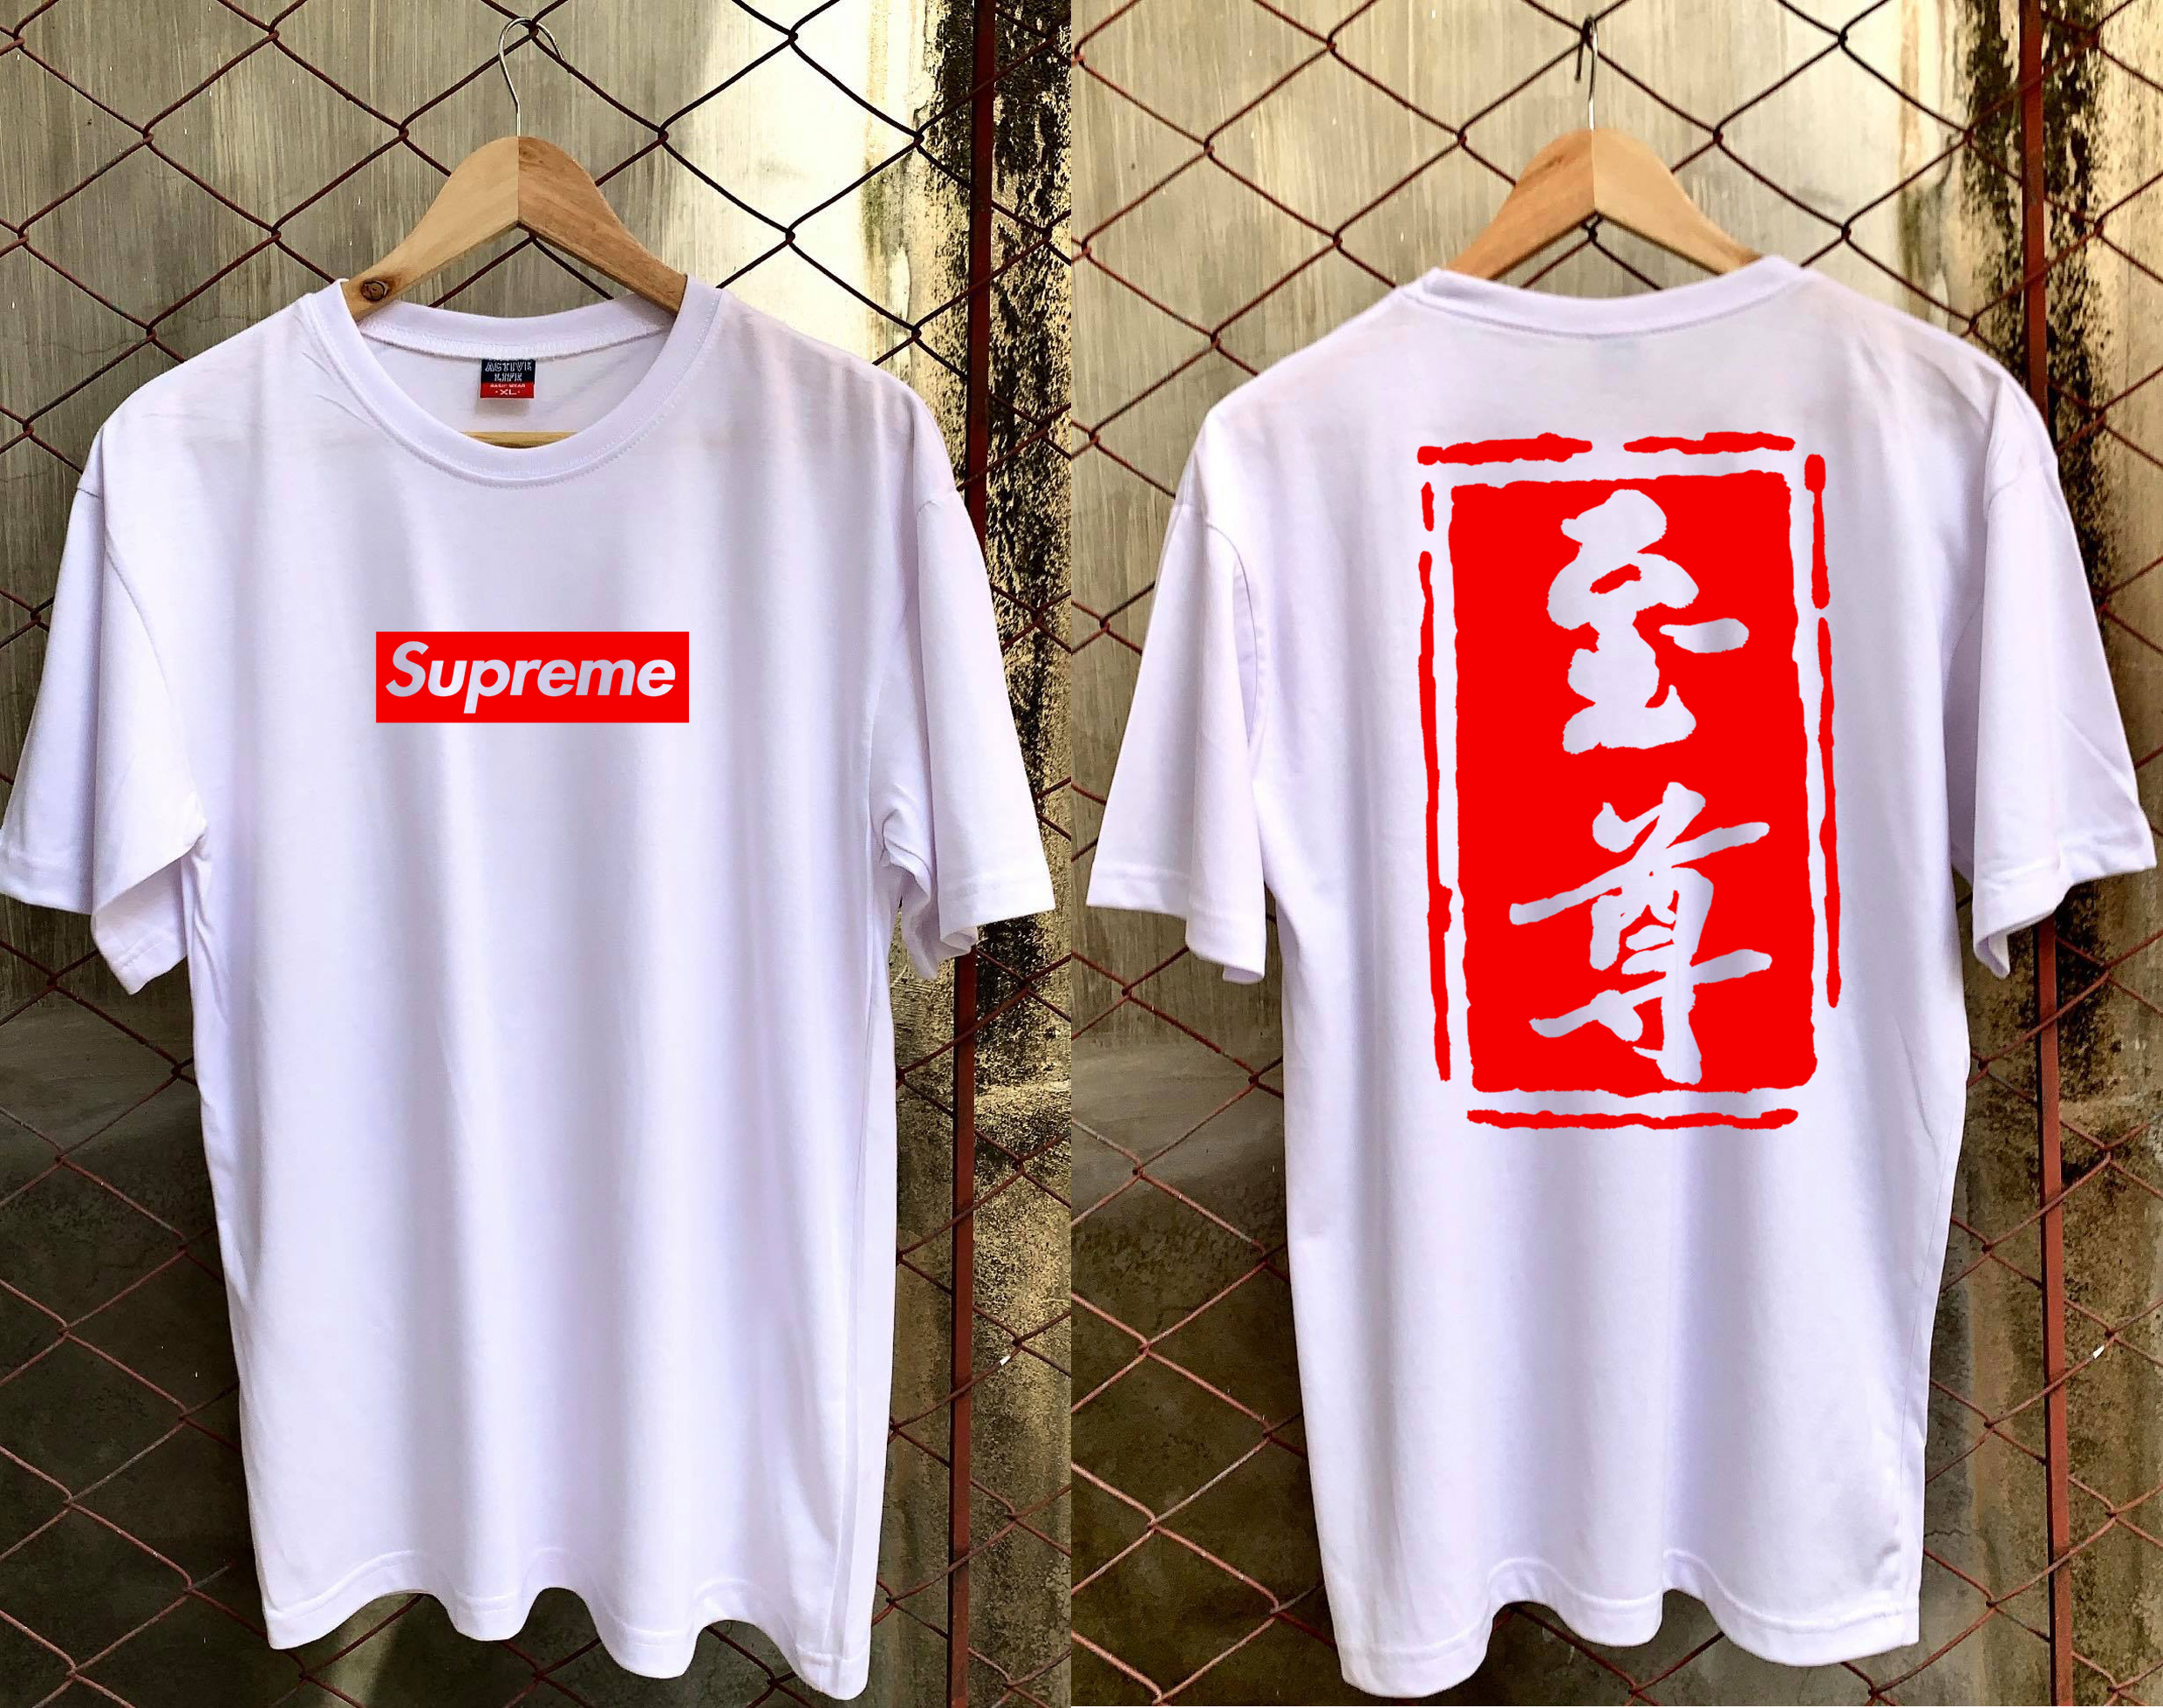 Japanese Supreme T-shirt For Men and Women High Quality and Affordable!